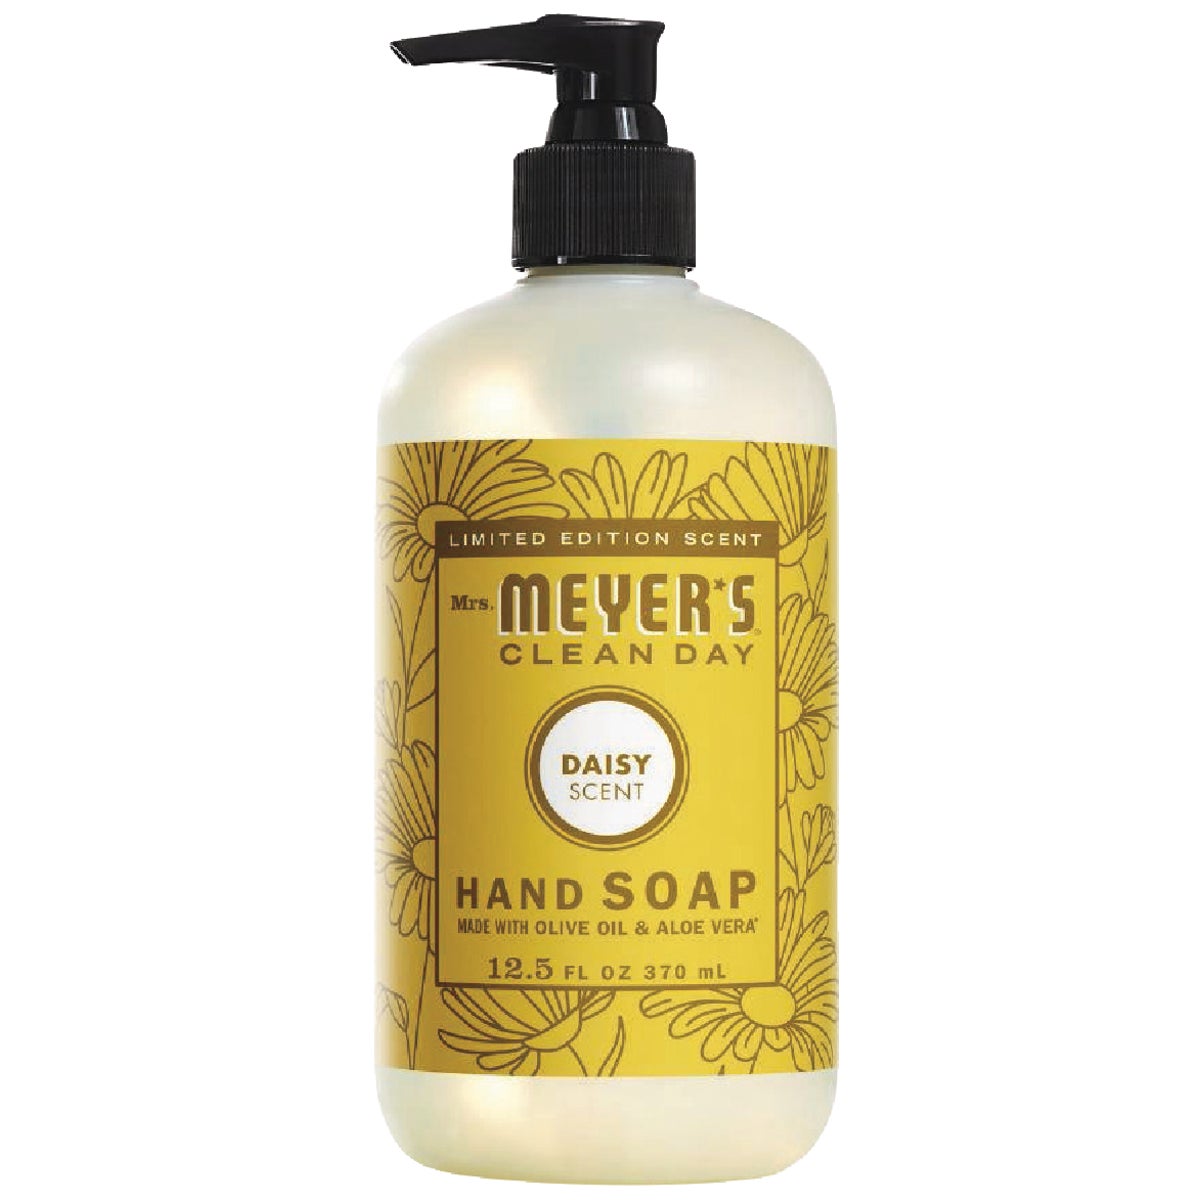 Mrs. Meyer's Clean Day 12.5 Oz. Daisy Hand Soap